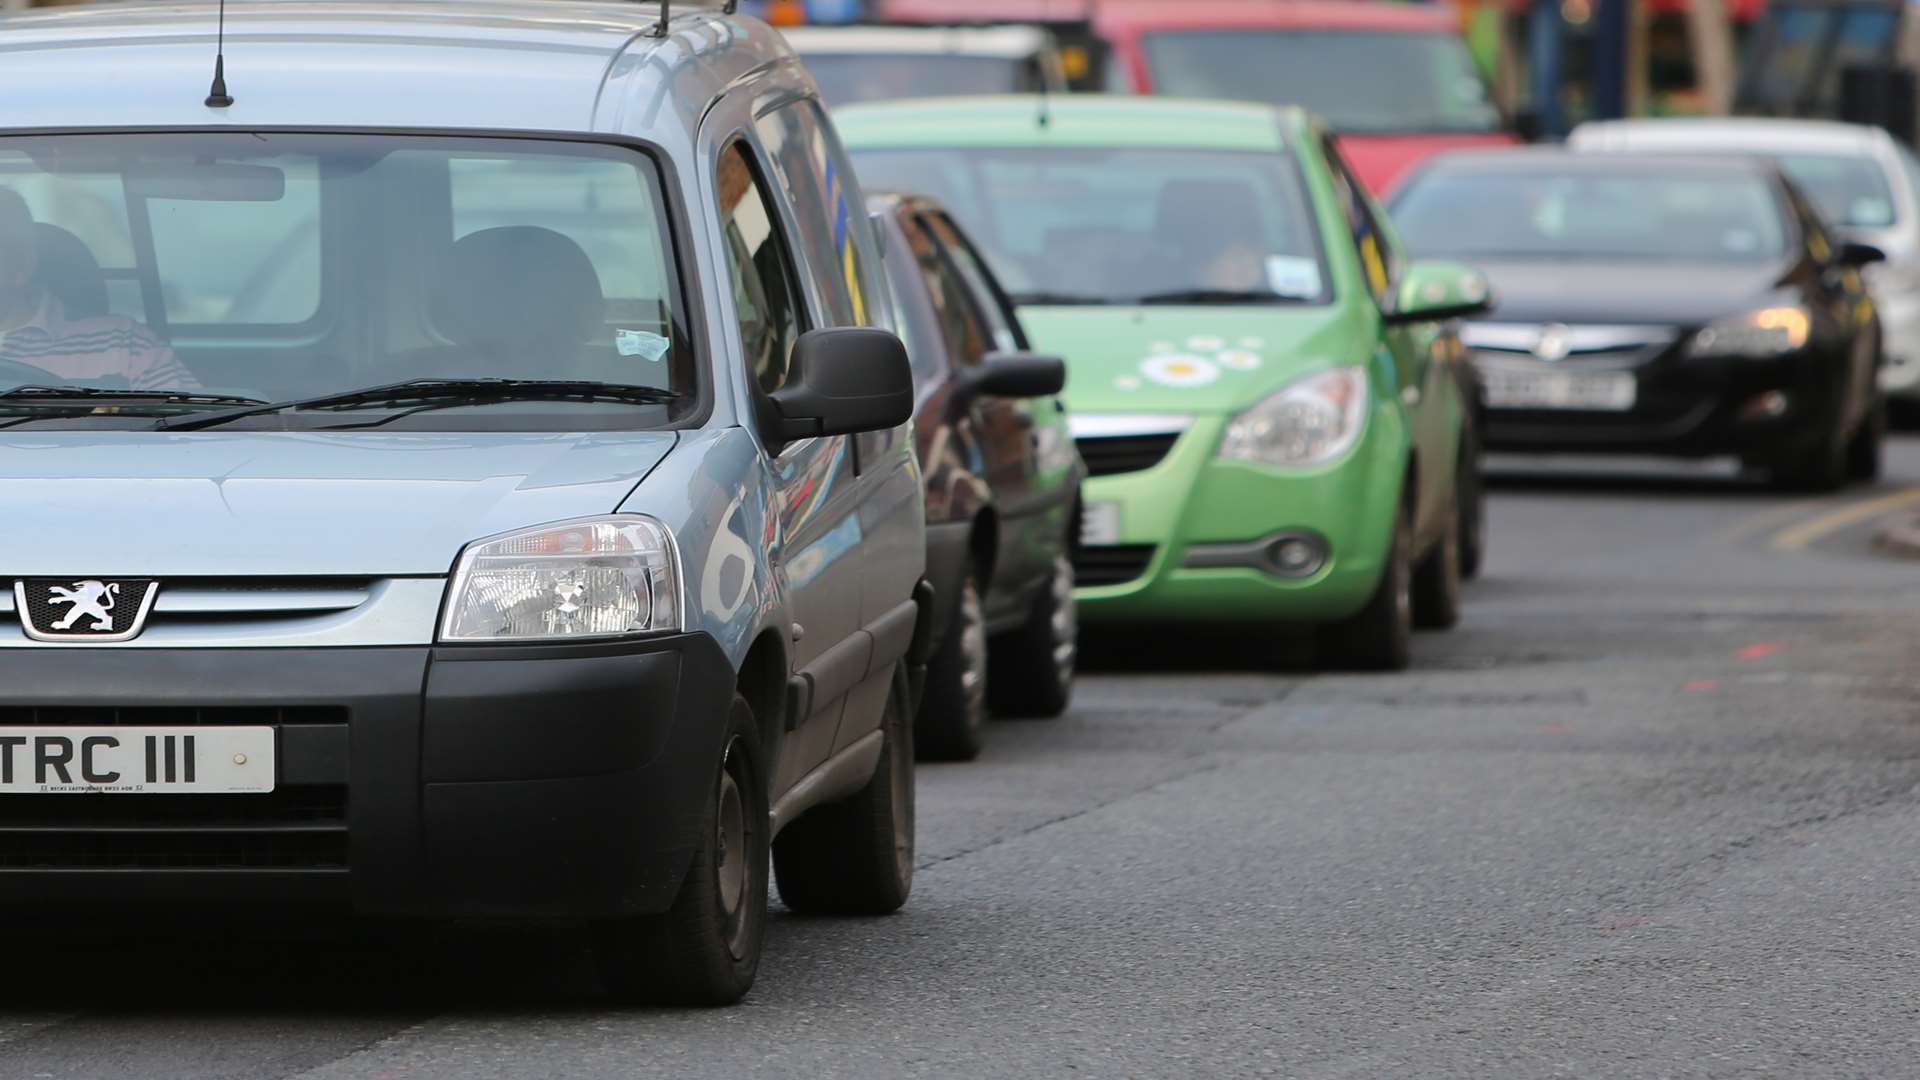 Traffic ground to a halt in many parts of Sittingbourne